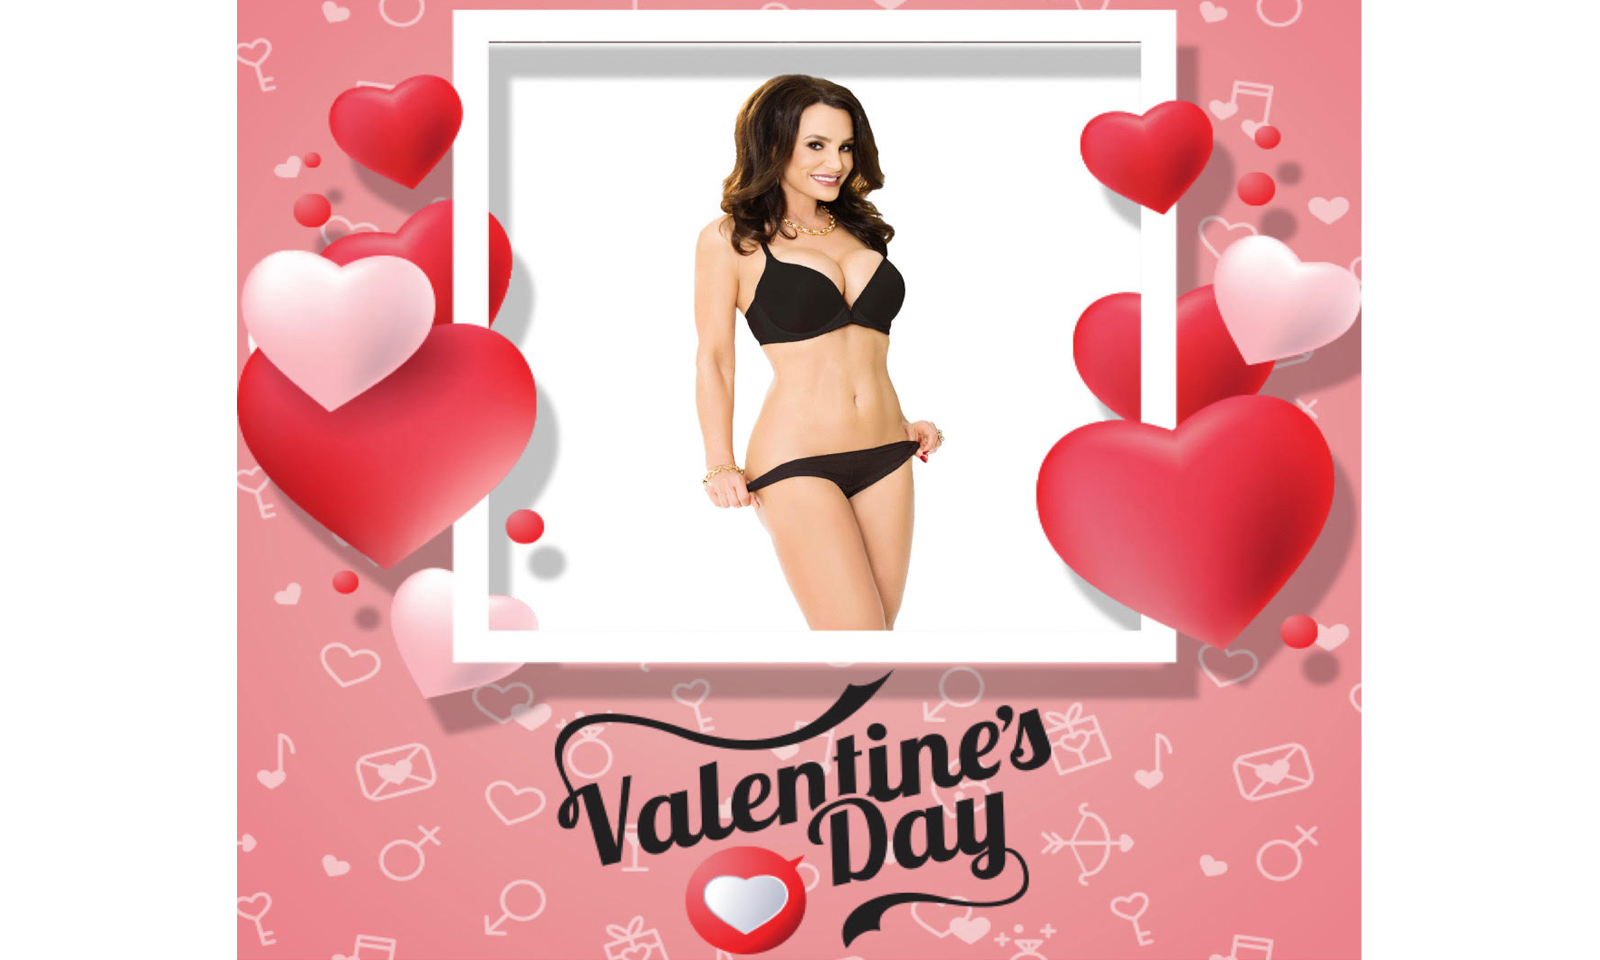 Fans Can Get A Valentine Treat at TheLisaAnn.com